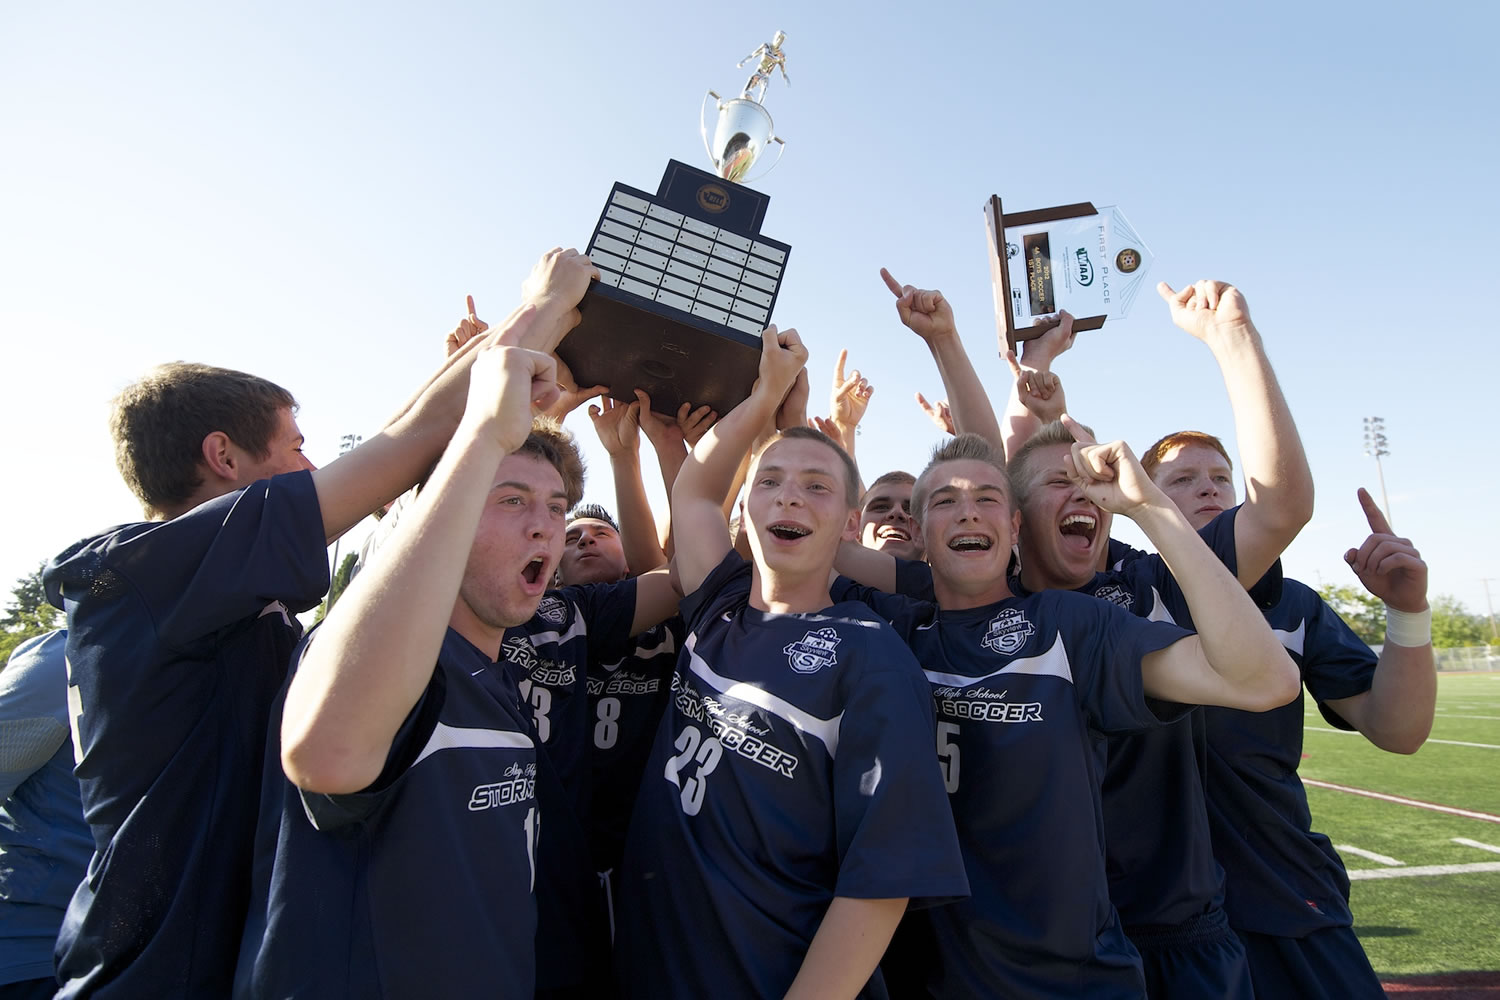 The Skyview High School boys soccer team hoist the 4A State Soccer Championship trophy Saturday May 26, 2012 at Carl Sparks Stadium in Puyallup, Washington.